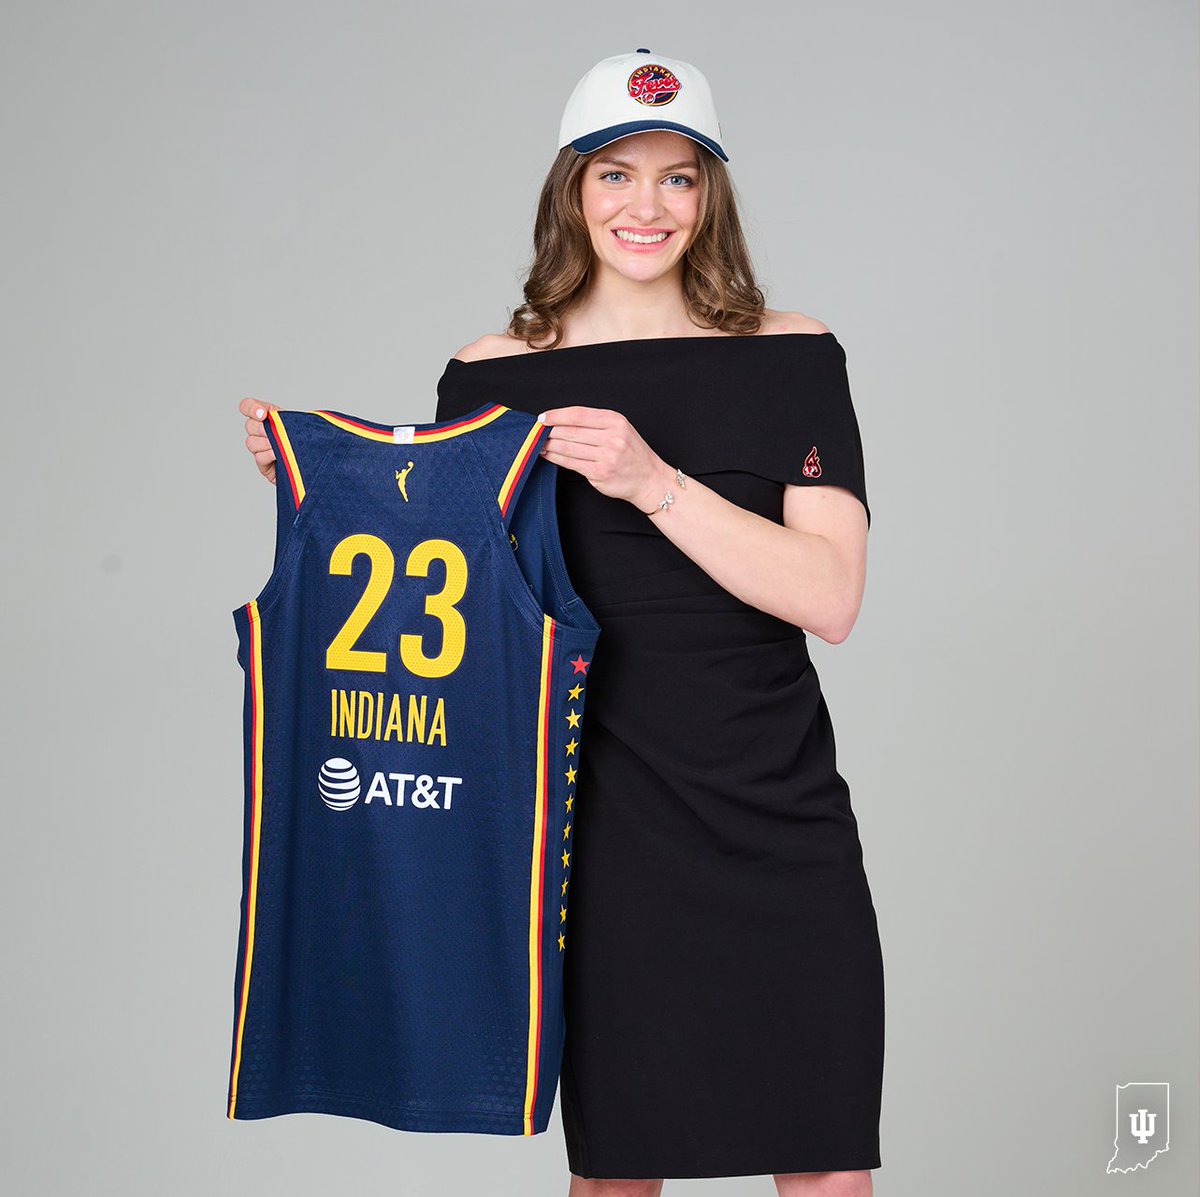 🚨 Indiana fans! 🚨 Head to Gainbridge Fieldhouse May 19 to see @grace_berger34's first time suiting up for the @IndianaFever. Ticketing info + a group rate. ➡️ bit.ly/3ABGyBA